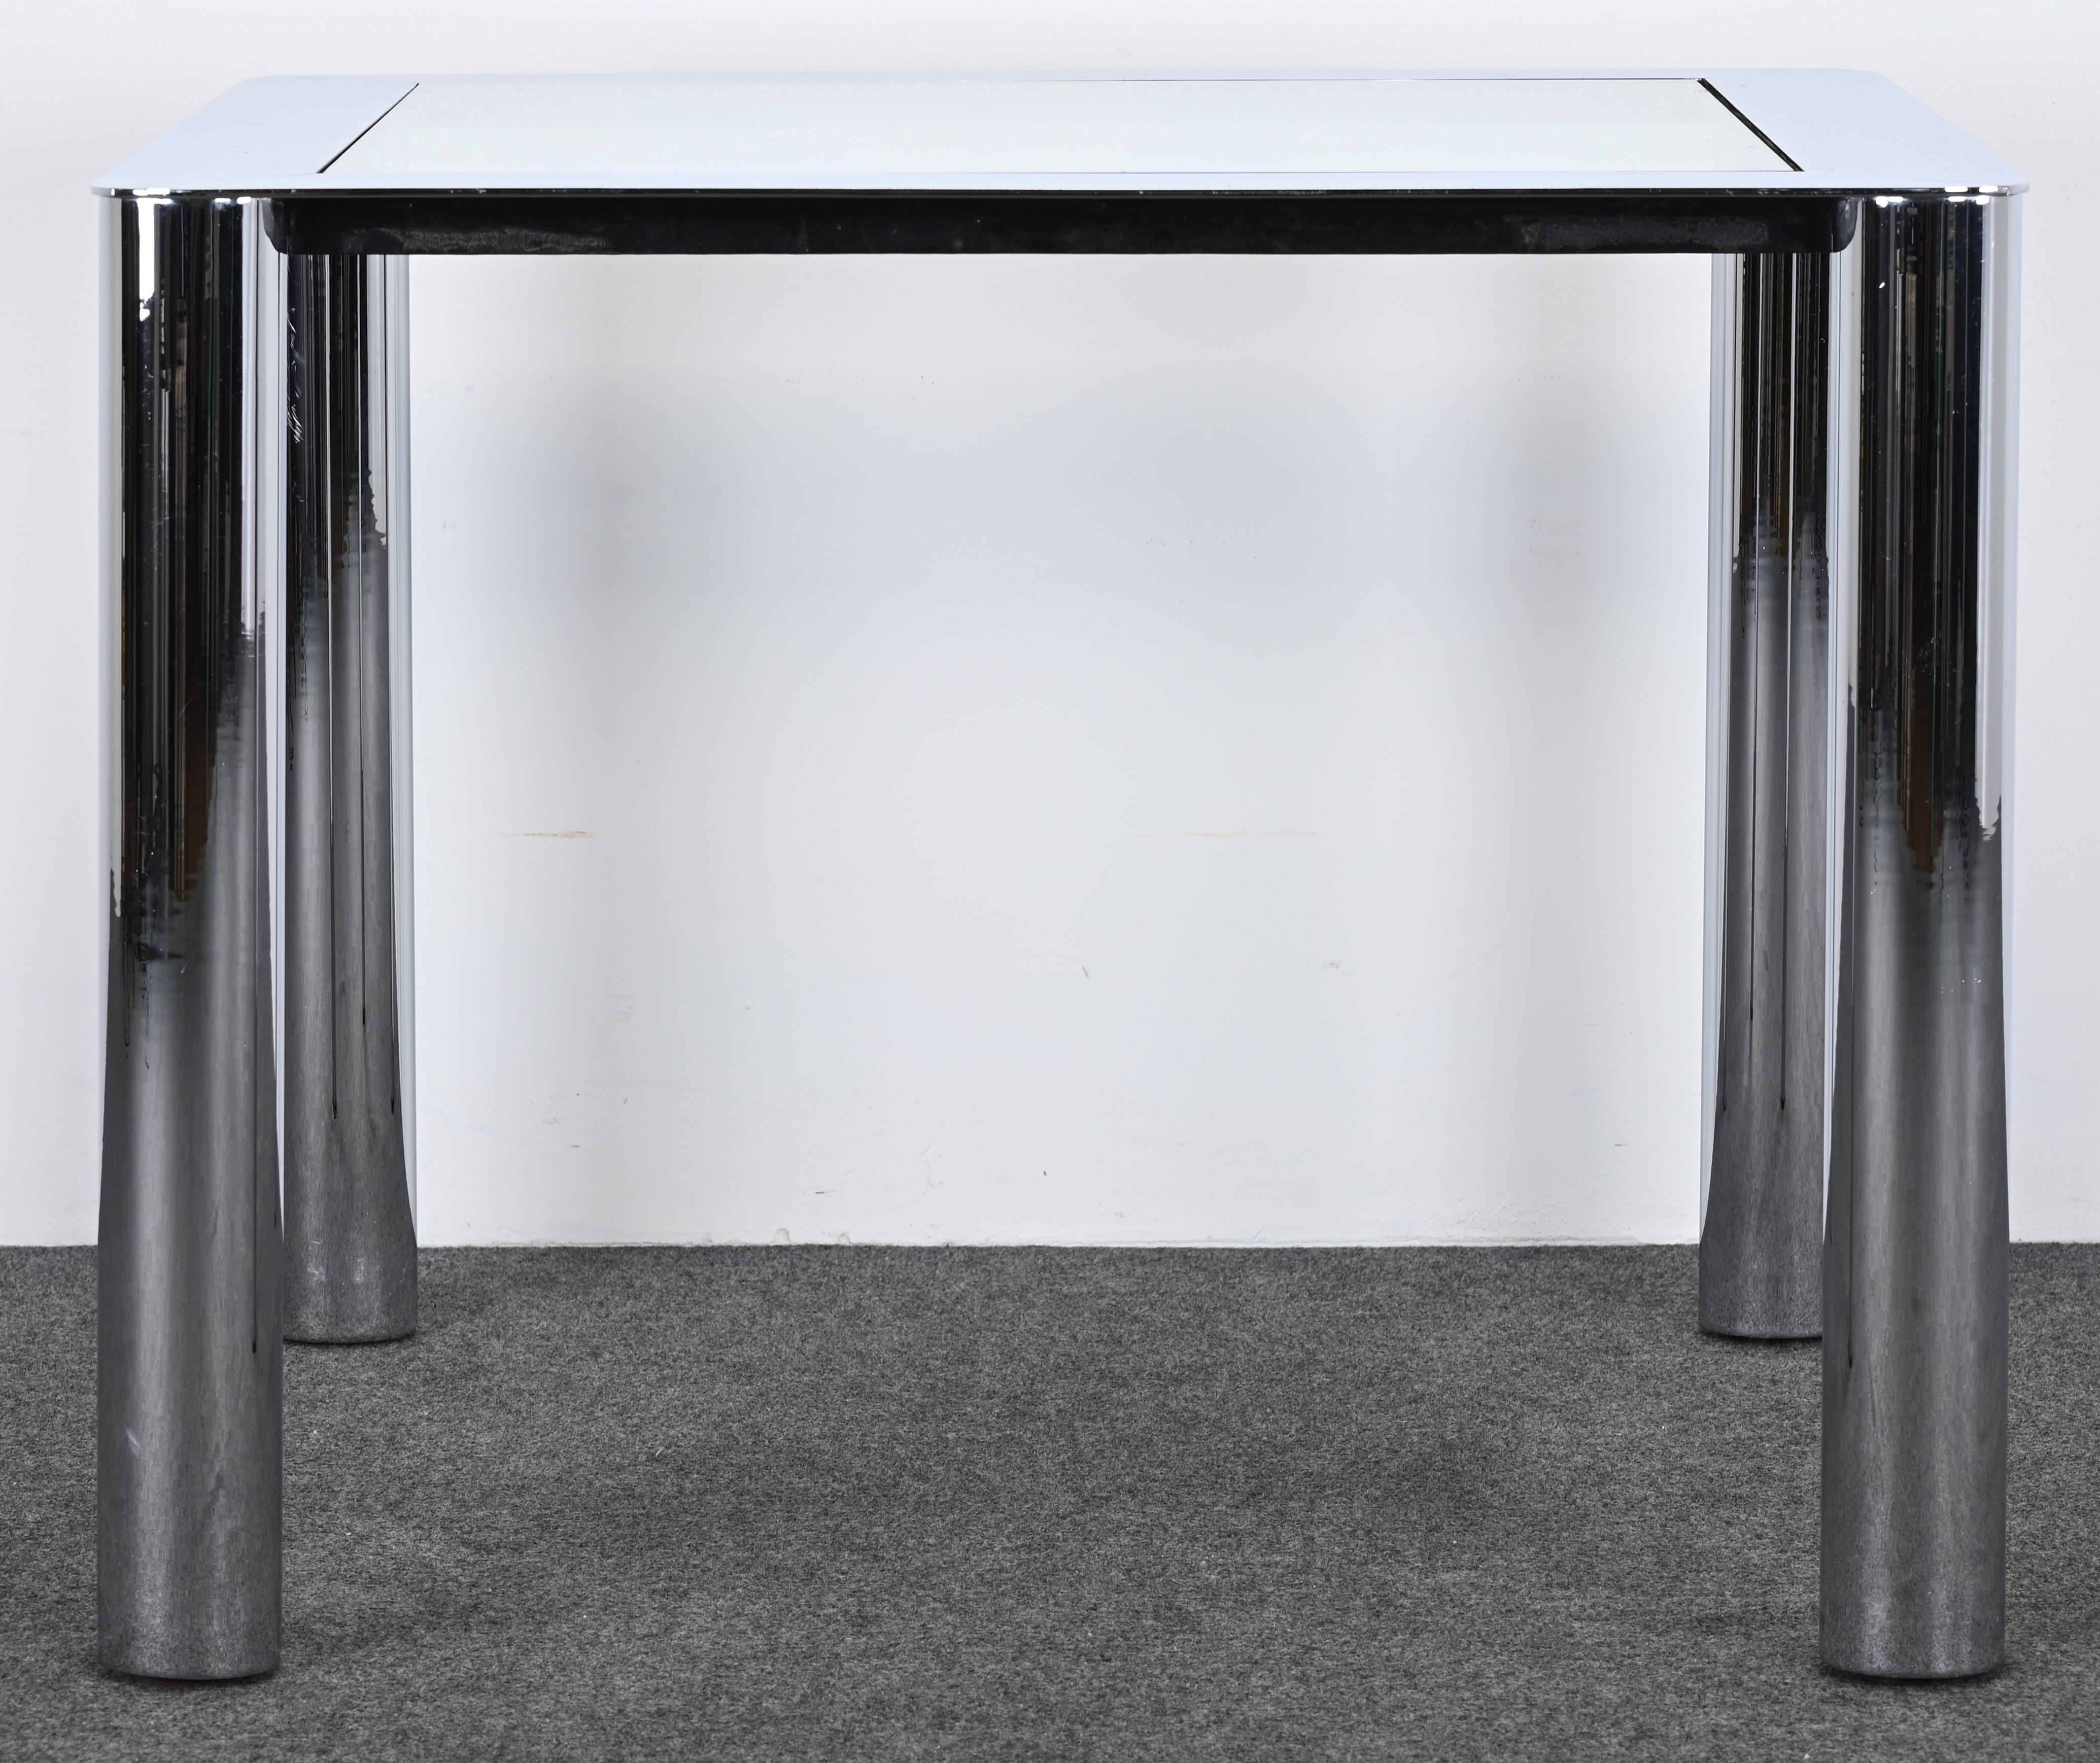 An impressive chrome designer card table by Sergio Mazza & Grimigna, circa 1970. This iconic designer is well known for mid-century modern lighting designs and we have never owned a piece of furniture like this before by this maker. Nice size